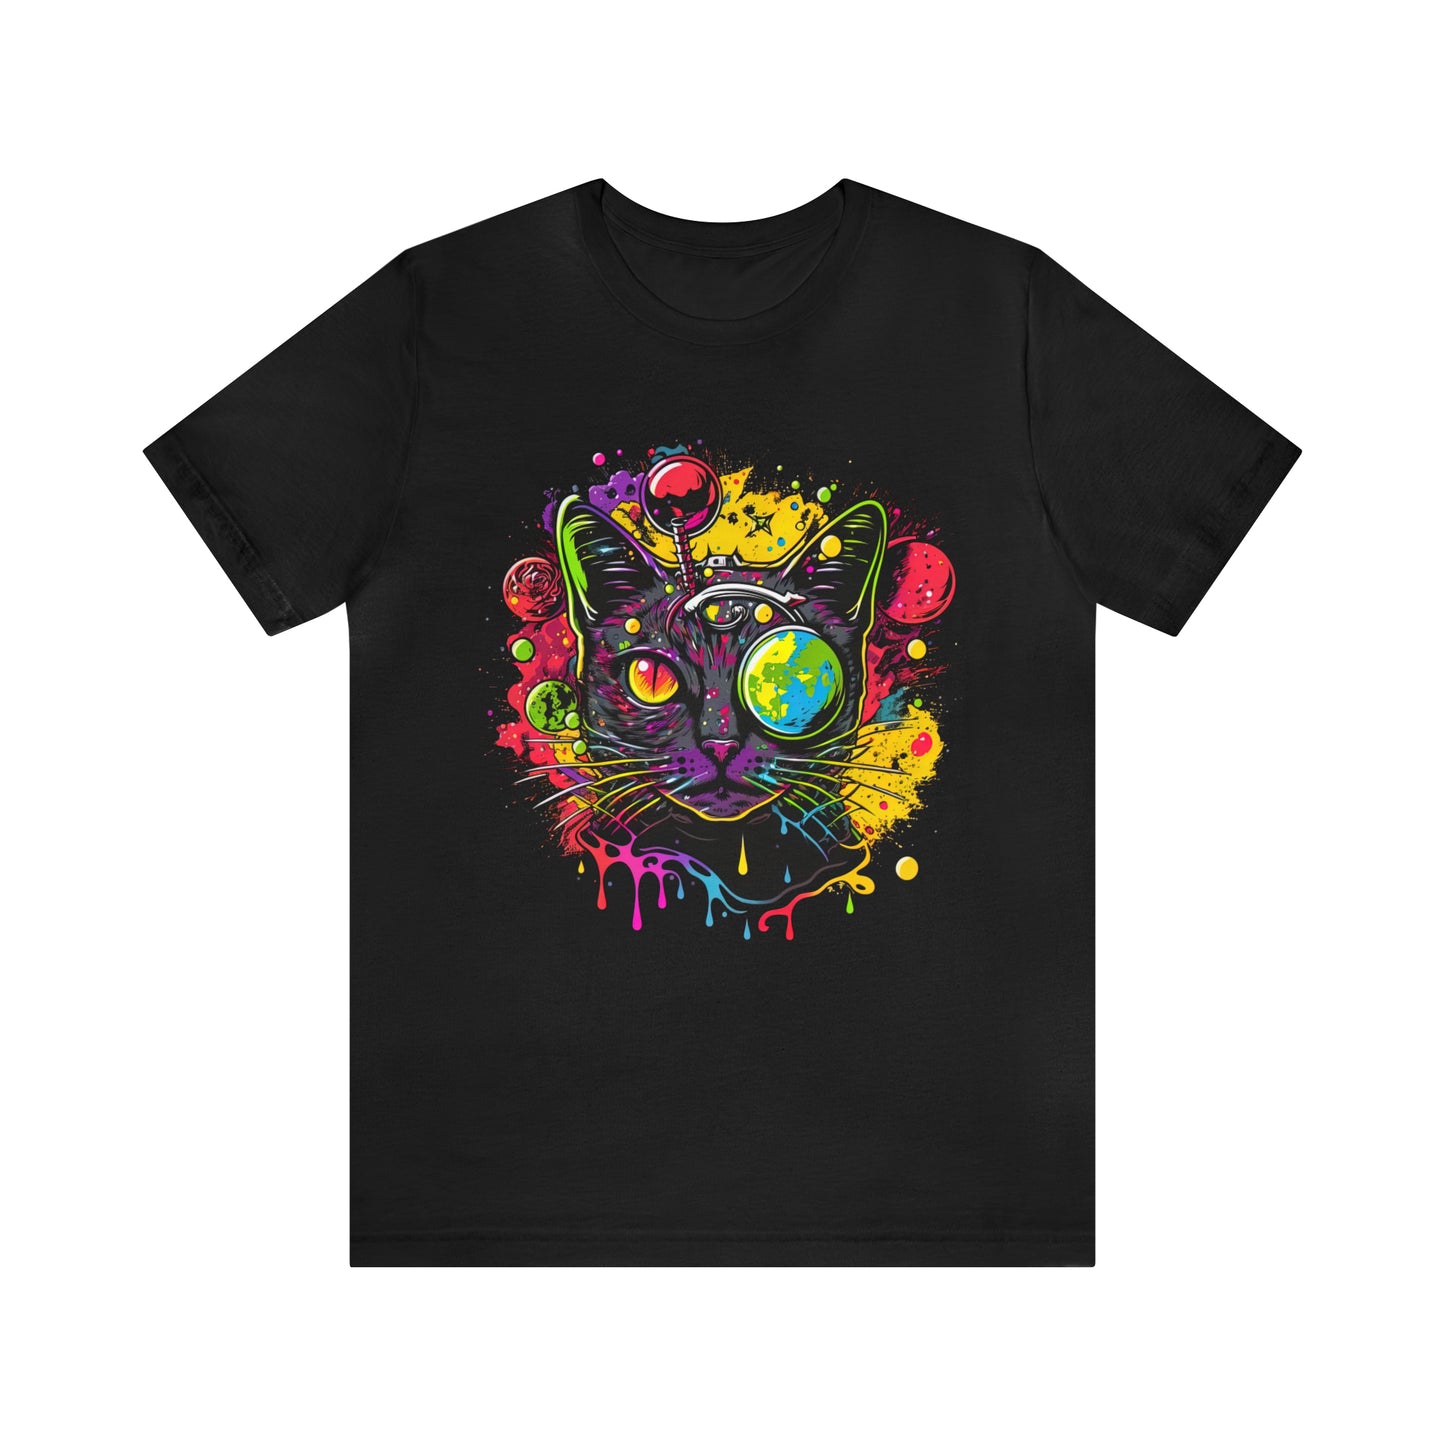 psychedelicBRANDz's Circuit Pawsader featuring a SiFi cat in a psychedelic design on a black shirt